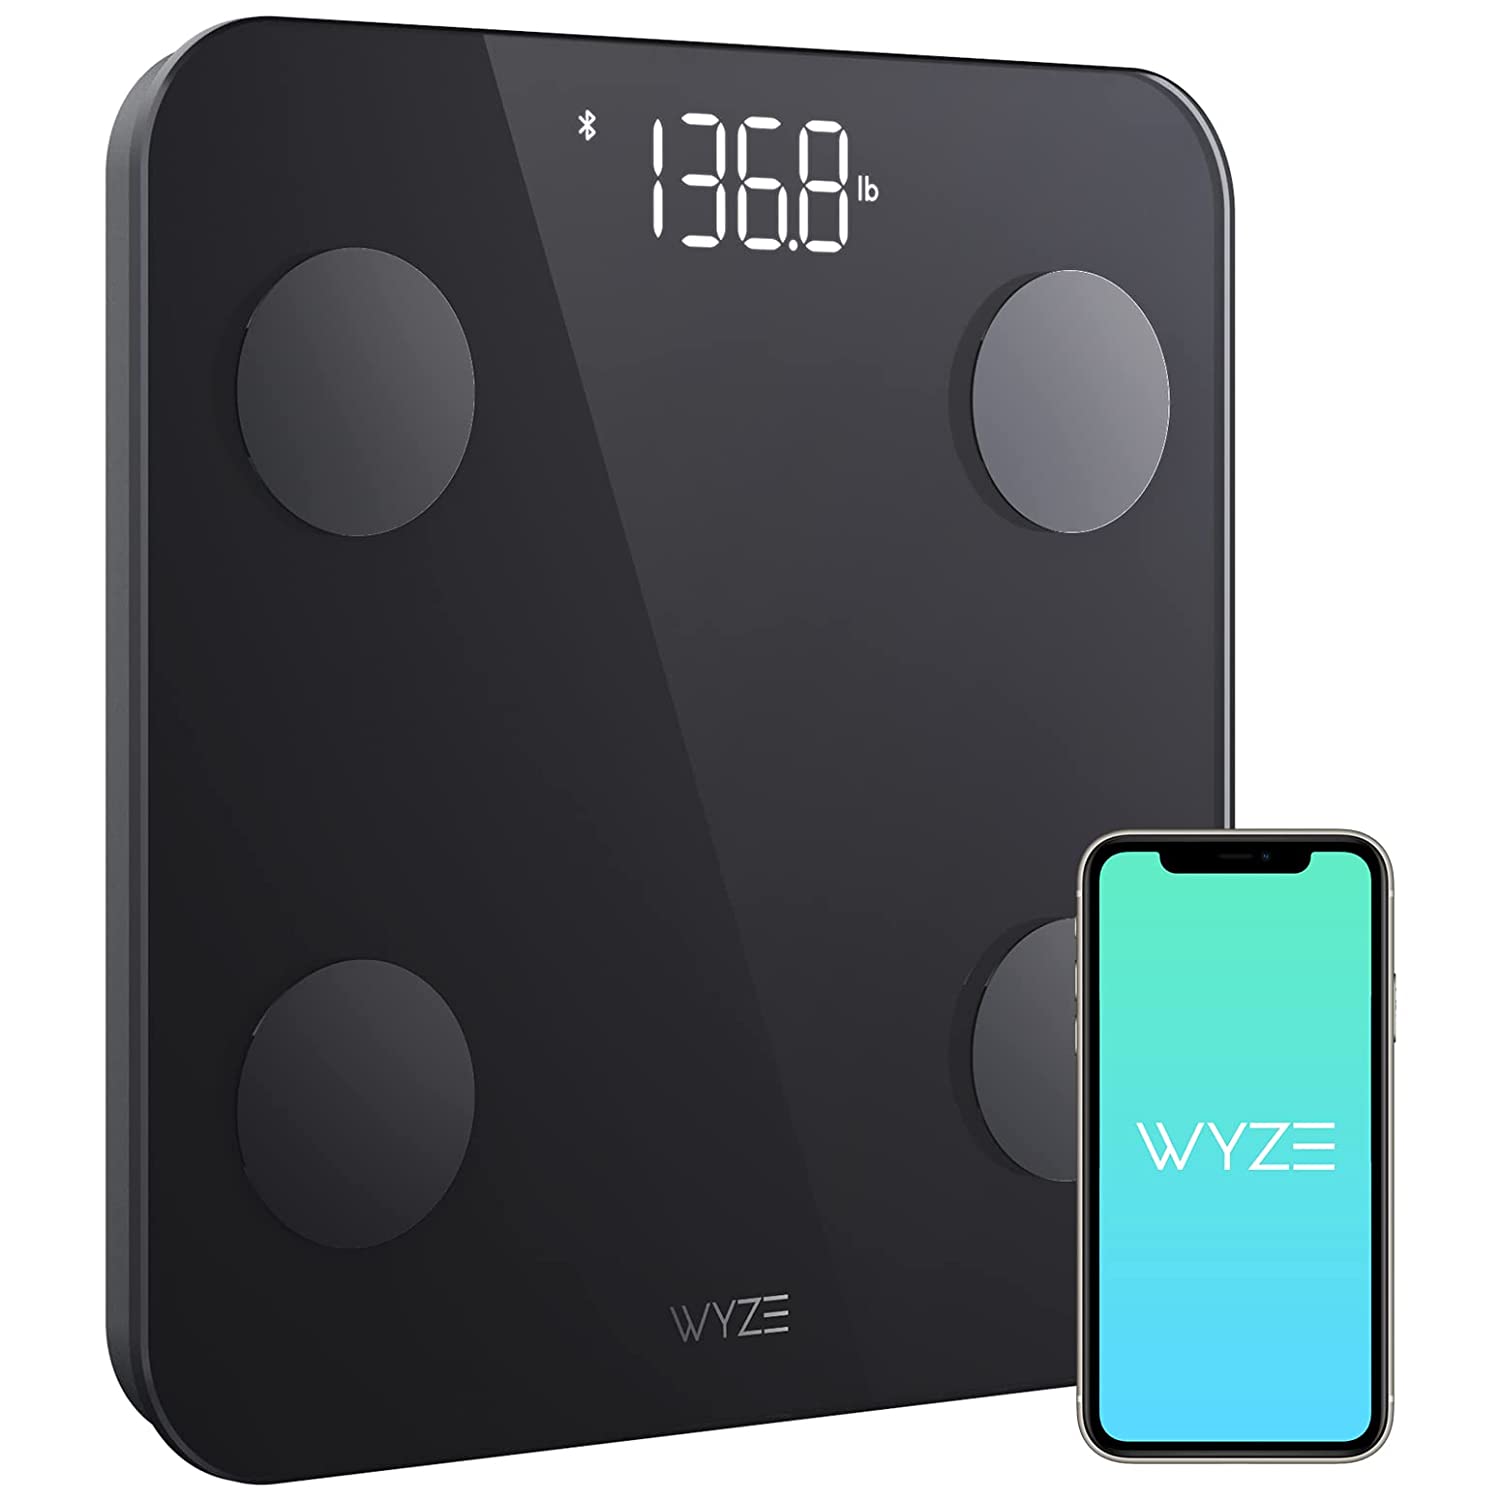  Wyze Smart Scale, Wireless Digital Bathroom Scale for Body  Weight, BMI, Body Fat Percentage, Heart Rate Monitor, App Connected,  Bluetooth, 400 lb Capacity (Black) : Health & Household